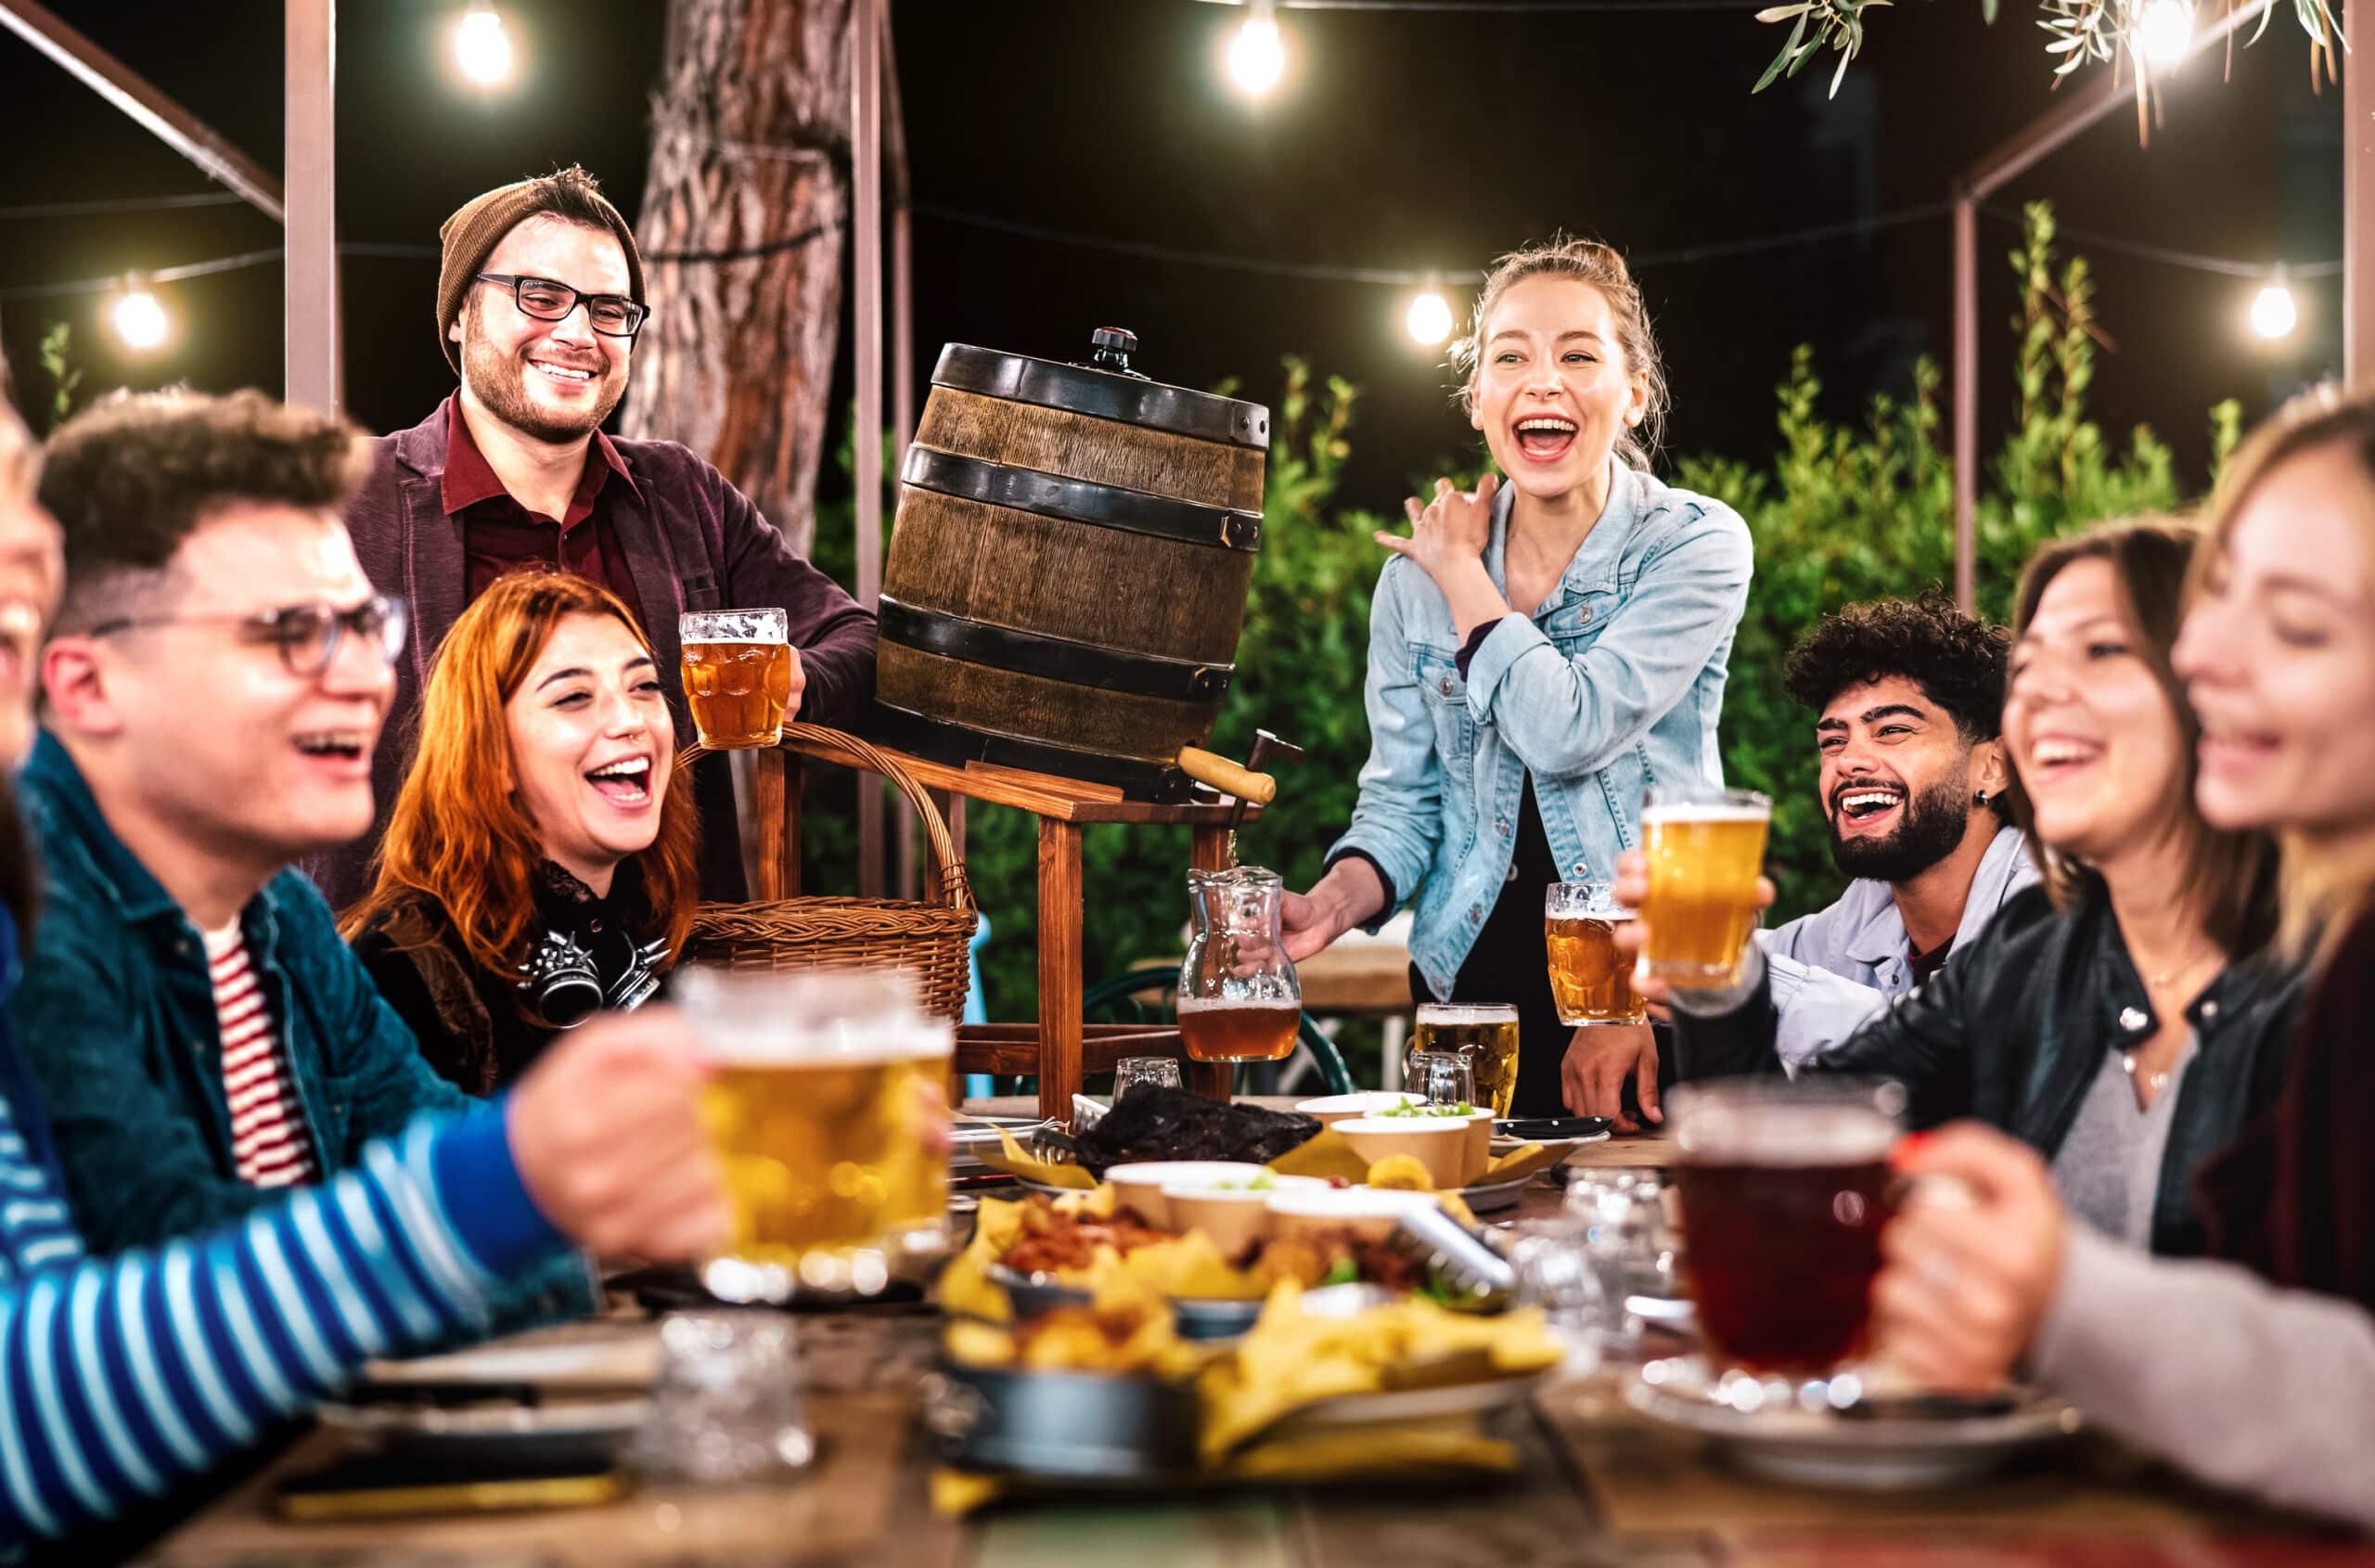 Happy men and women having fun drinking out at beer garden - Social gathering life style concept on young people enjoying hangout time together at night - Warm filter with shallow depth of field